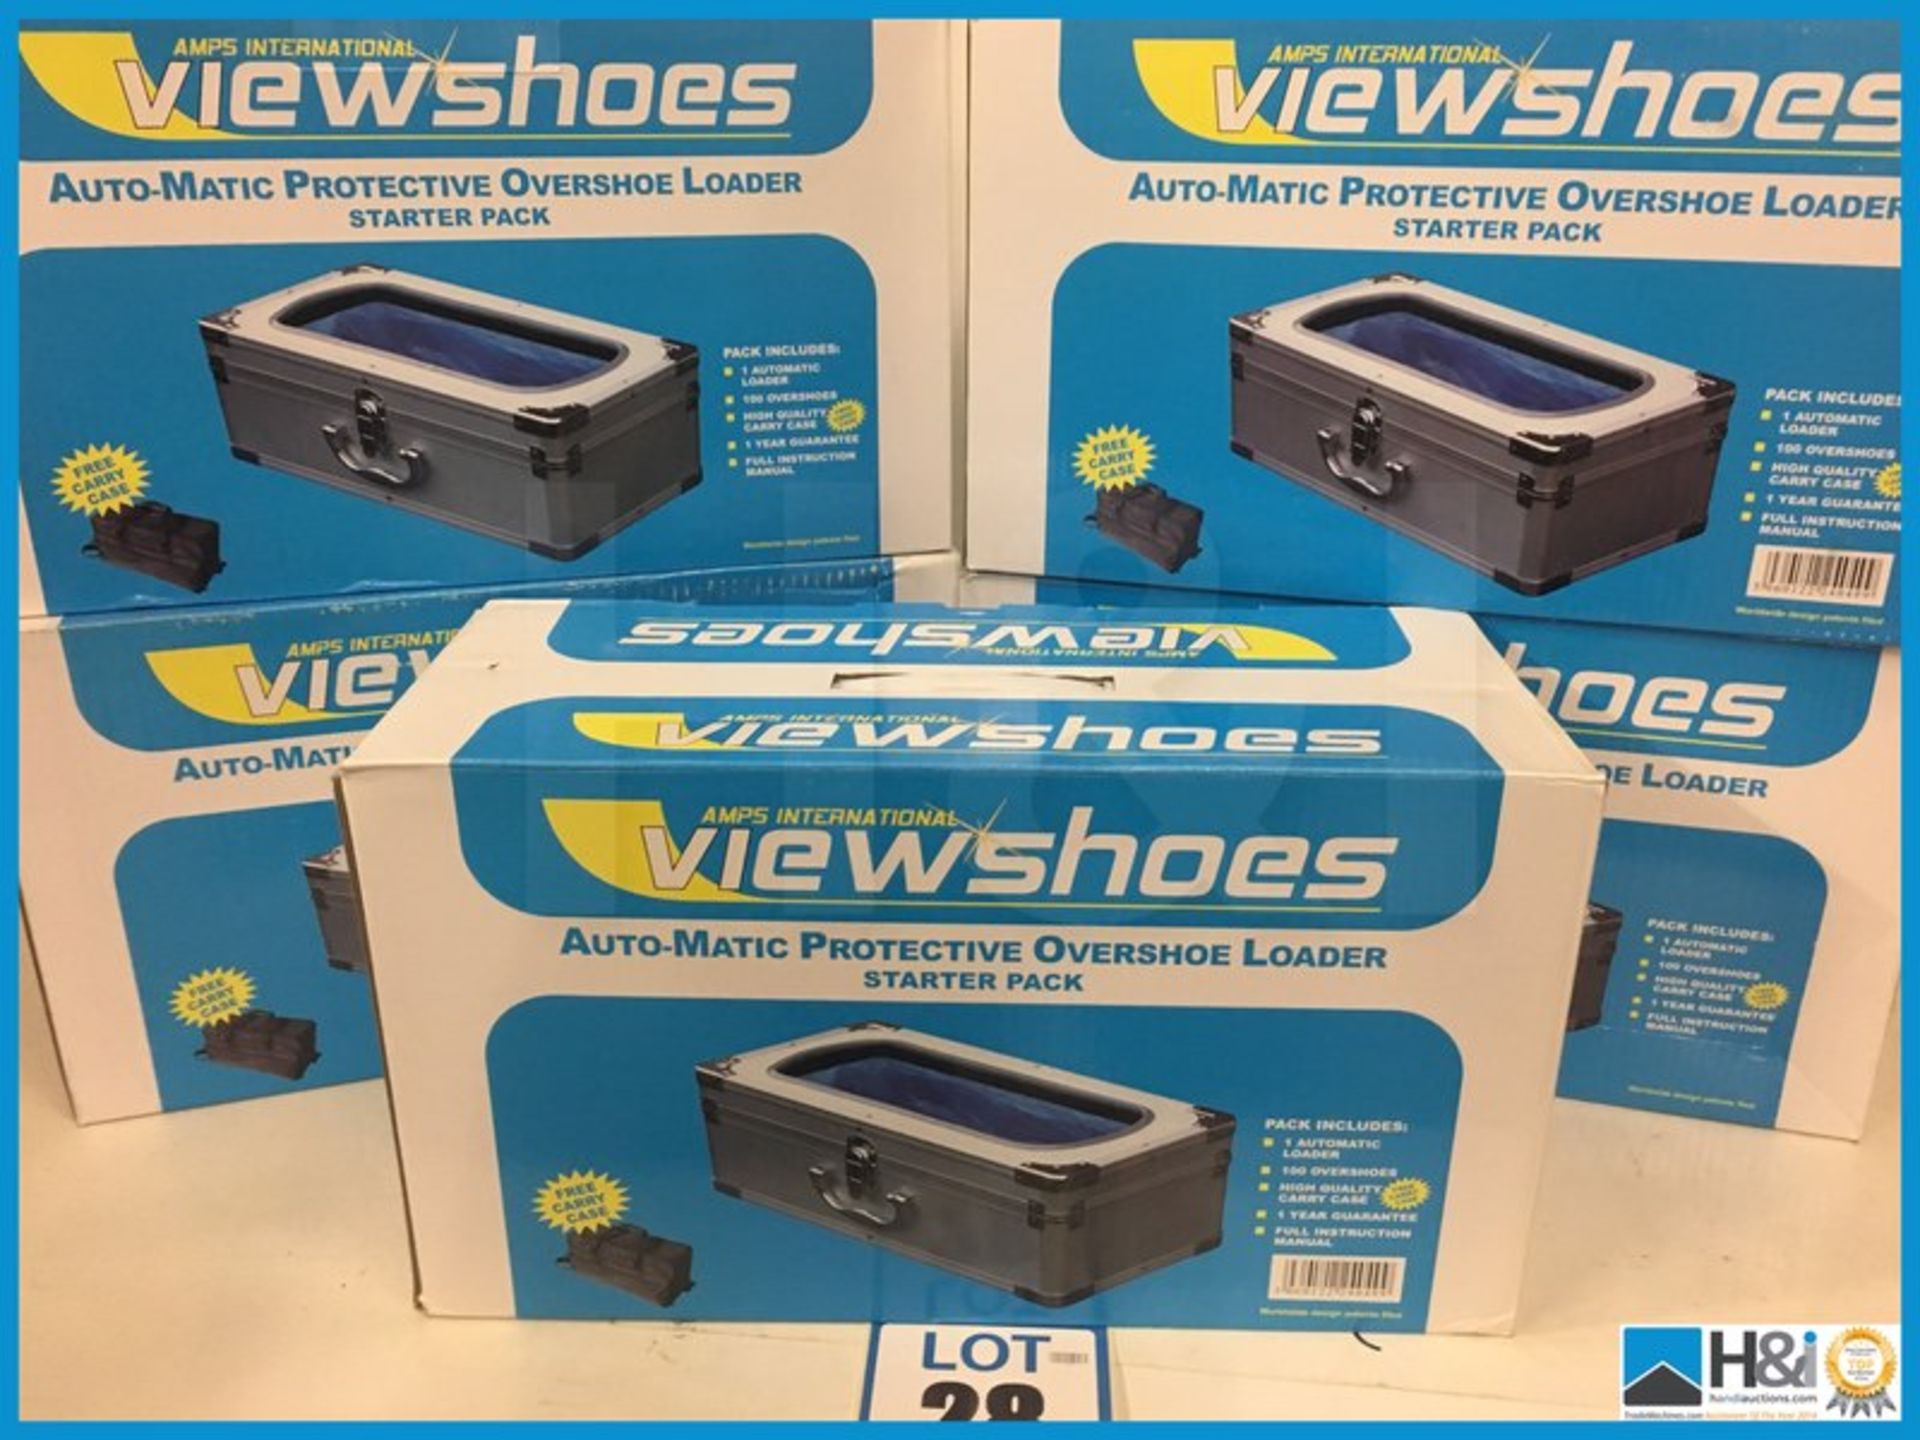 5 X Automatic shoe cover loader and carry case Brand new in box RRP £74.99 per unit LOT value of £